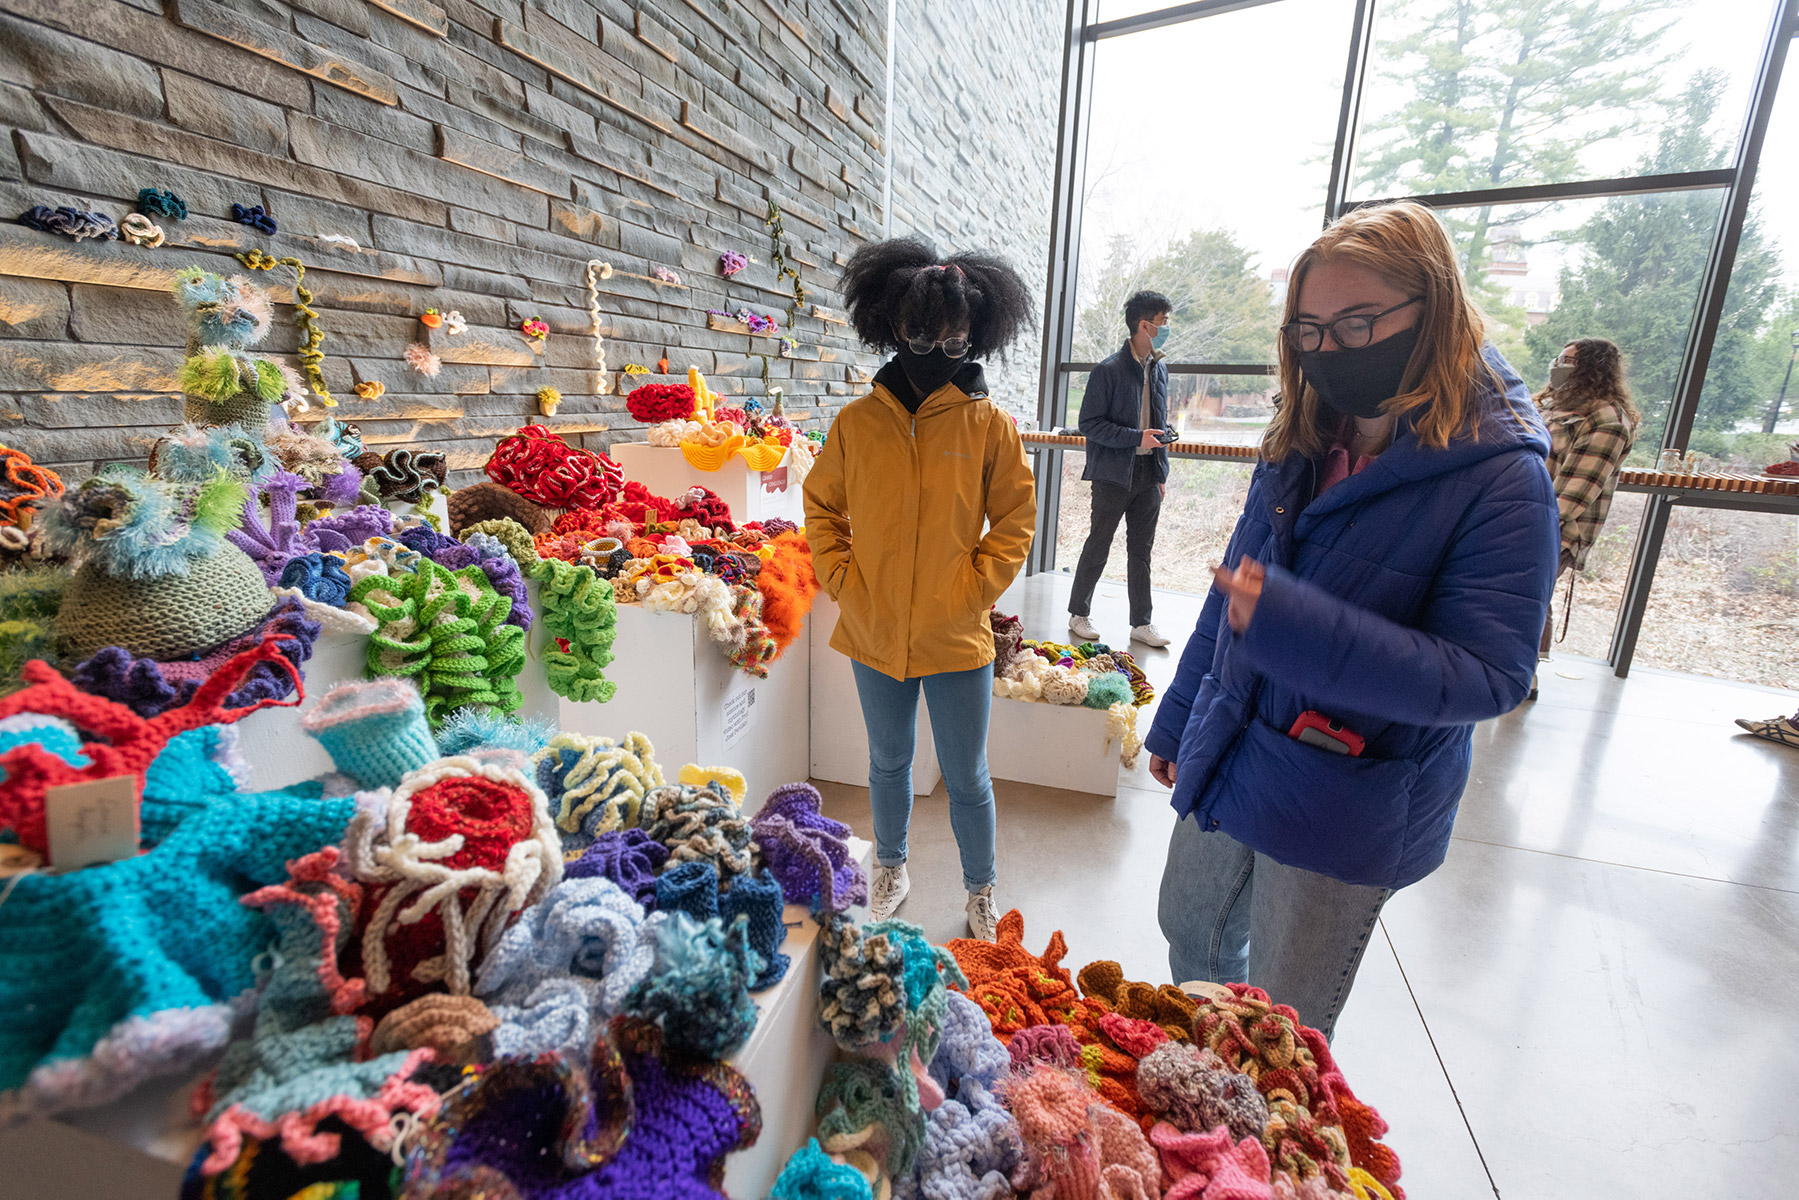 Visitors viewing the crocheted reef project